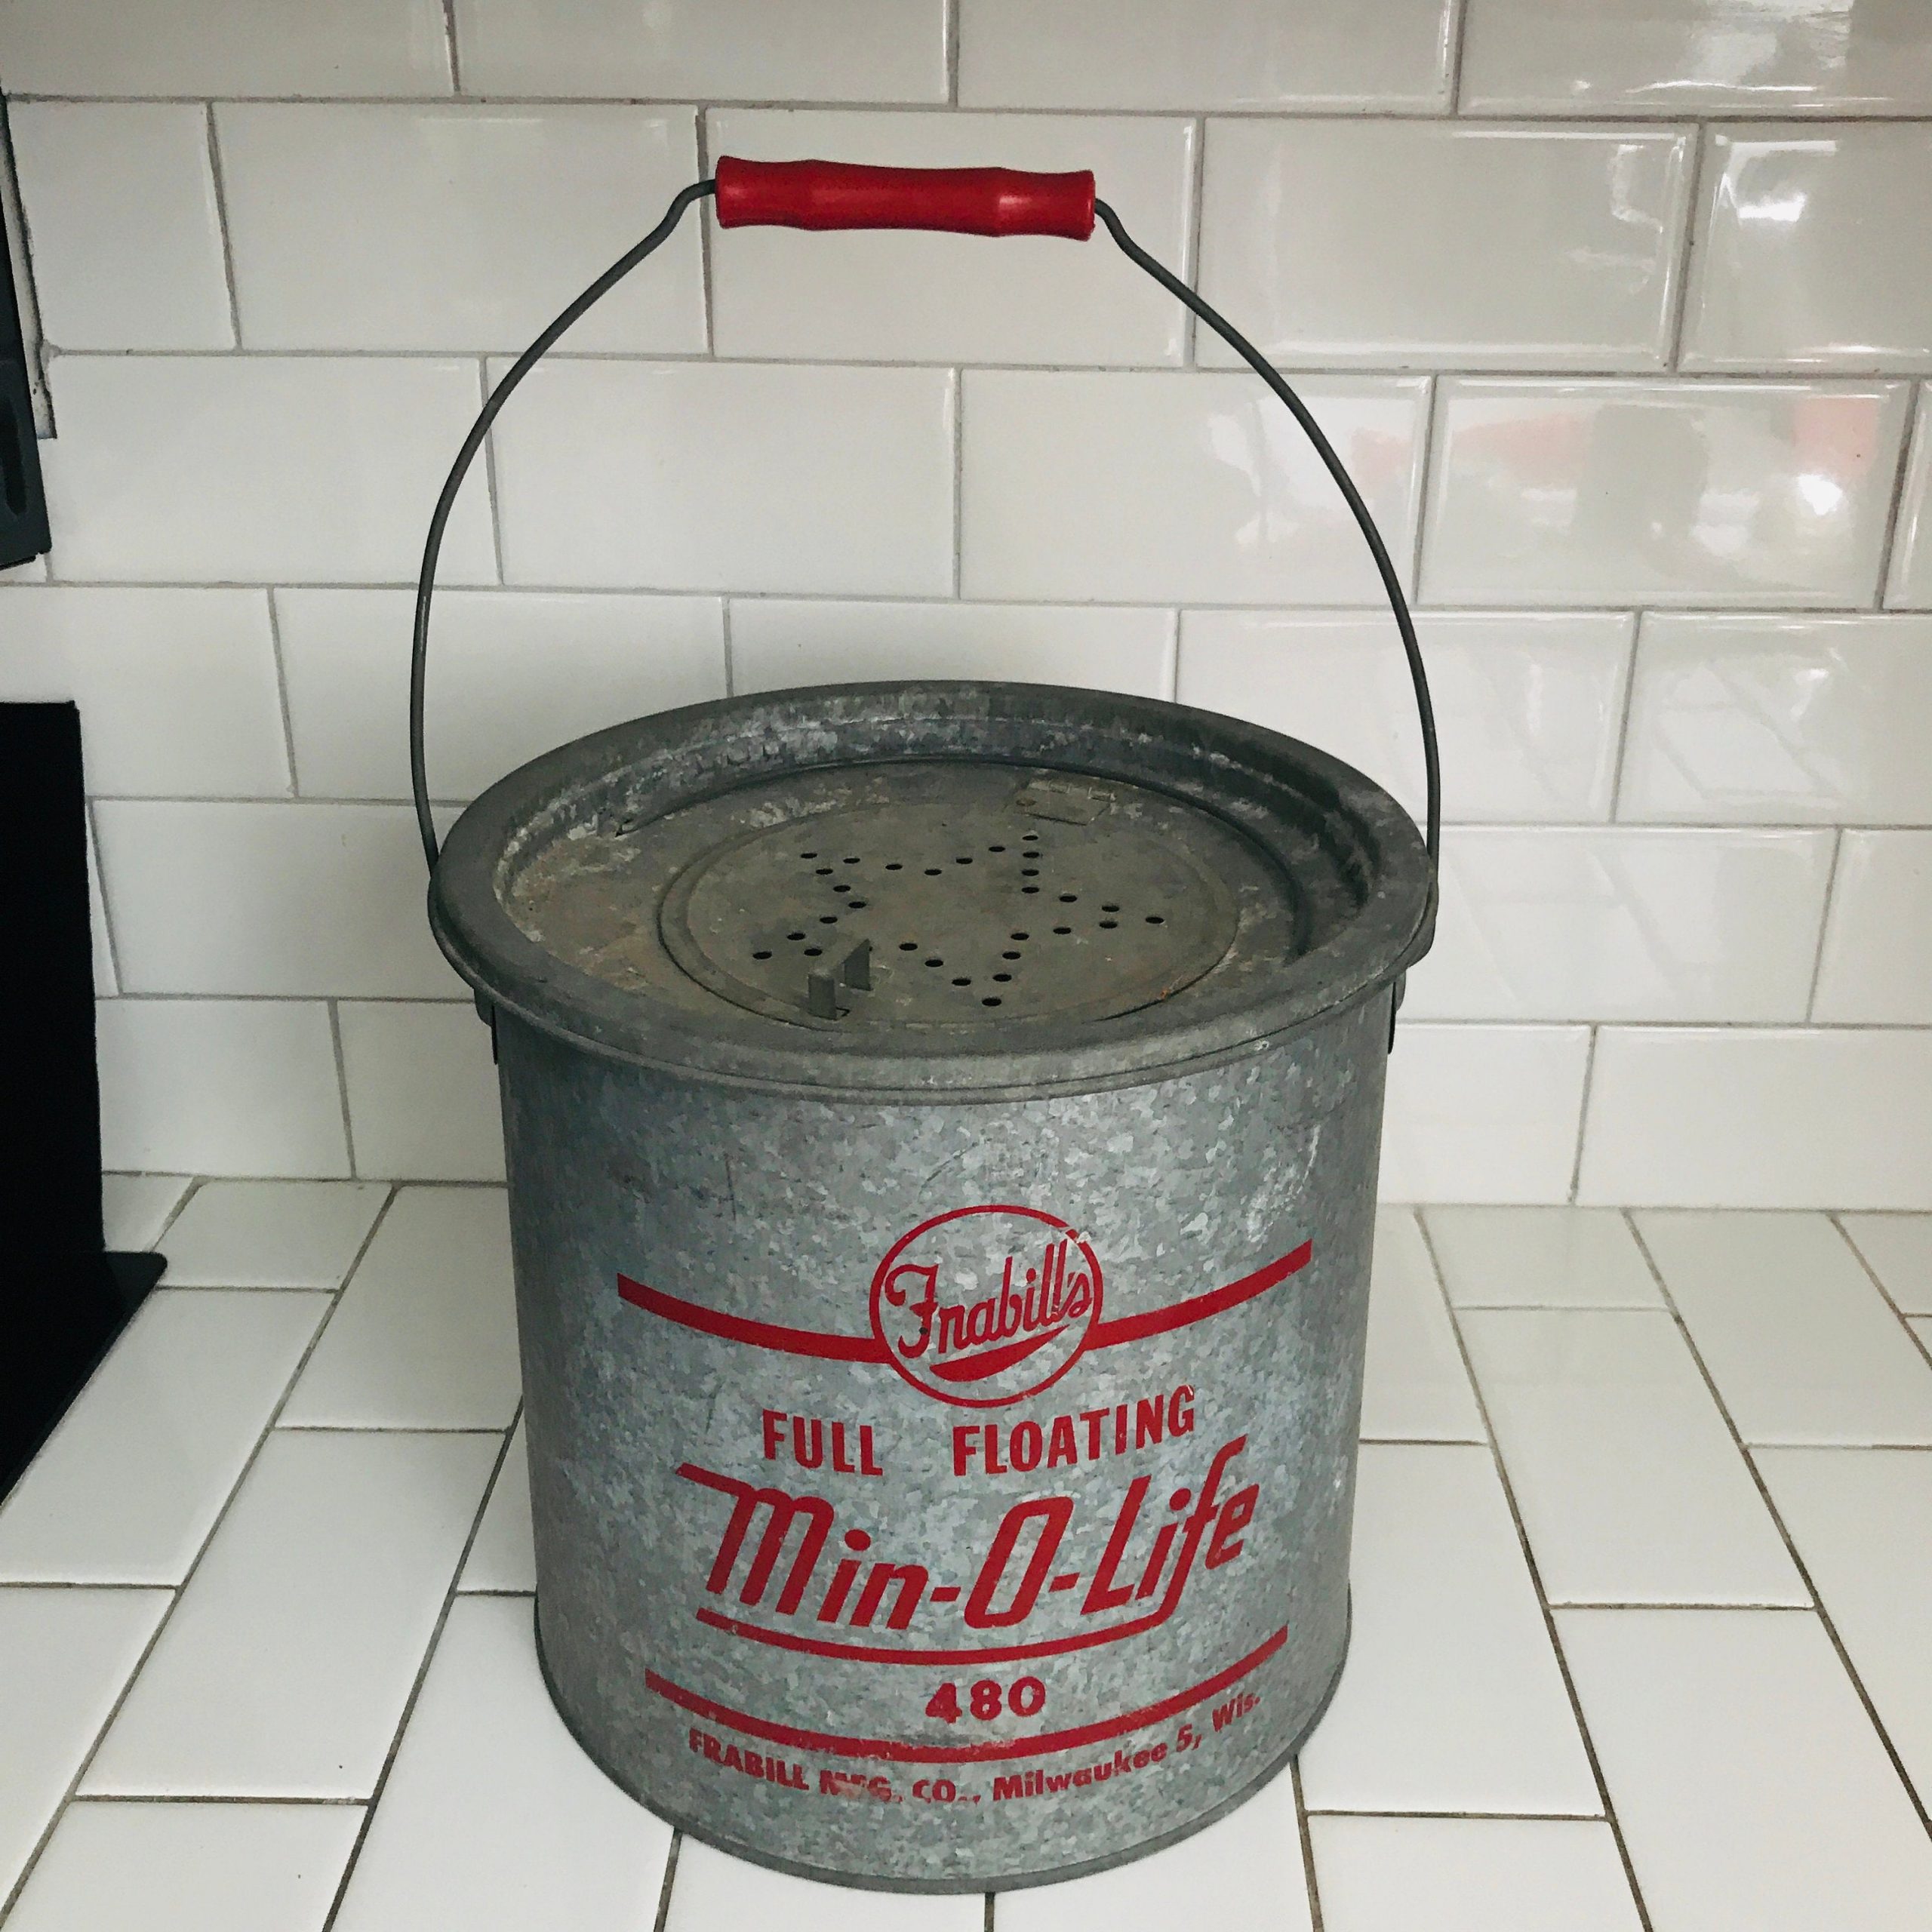 https://www.truevintageantiques.com/wp-content/uploads/2020/06/vintage-minnow-bucket-galavanized-metal-red-print-min-o-life-full-florating-frabills-great-condition-fishing-camping-lodge-farmhouse-decor-5efbd8881-scaled.jpg